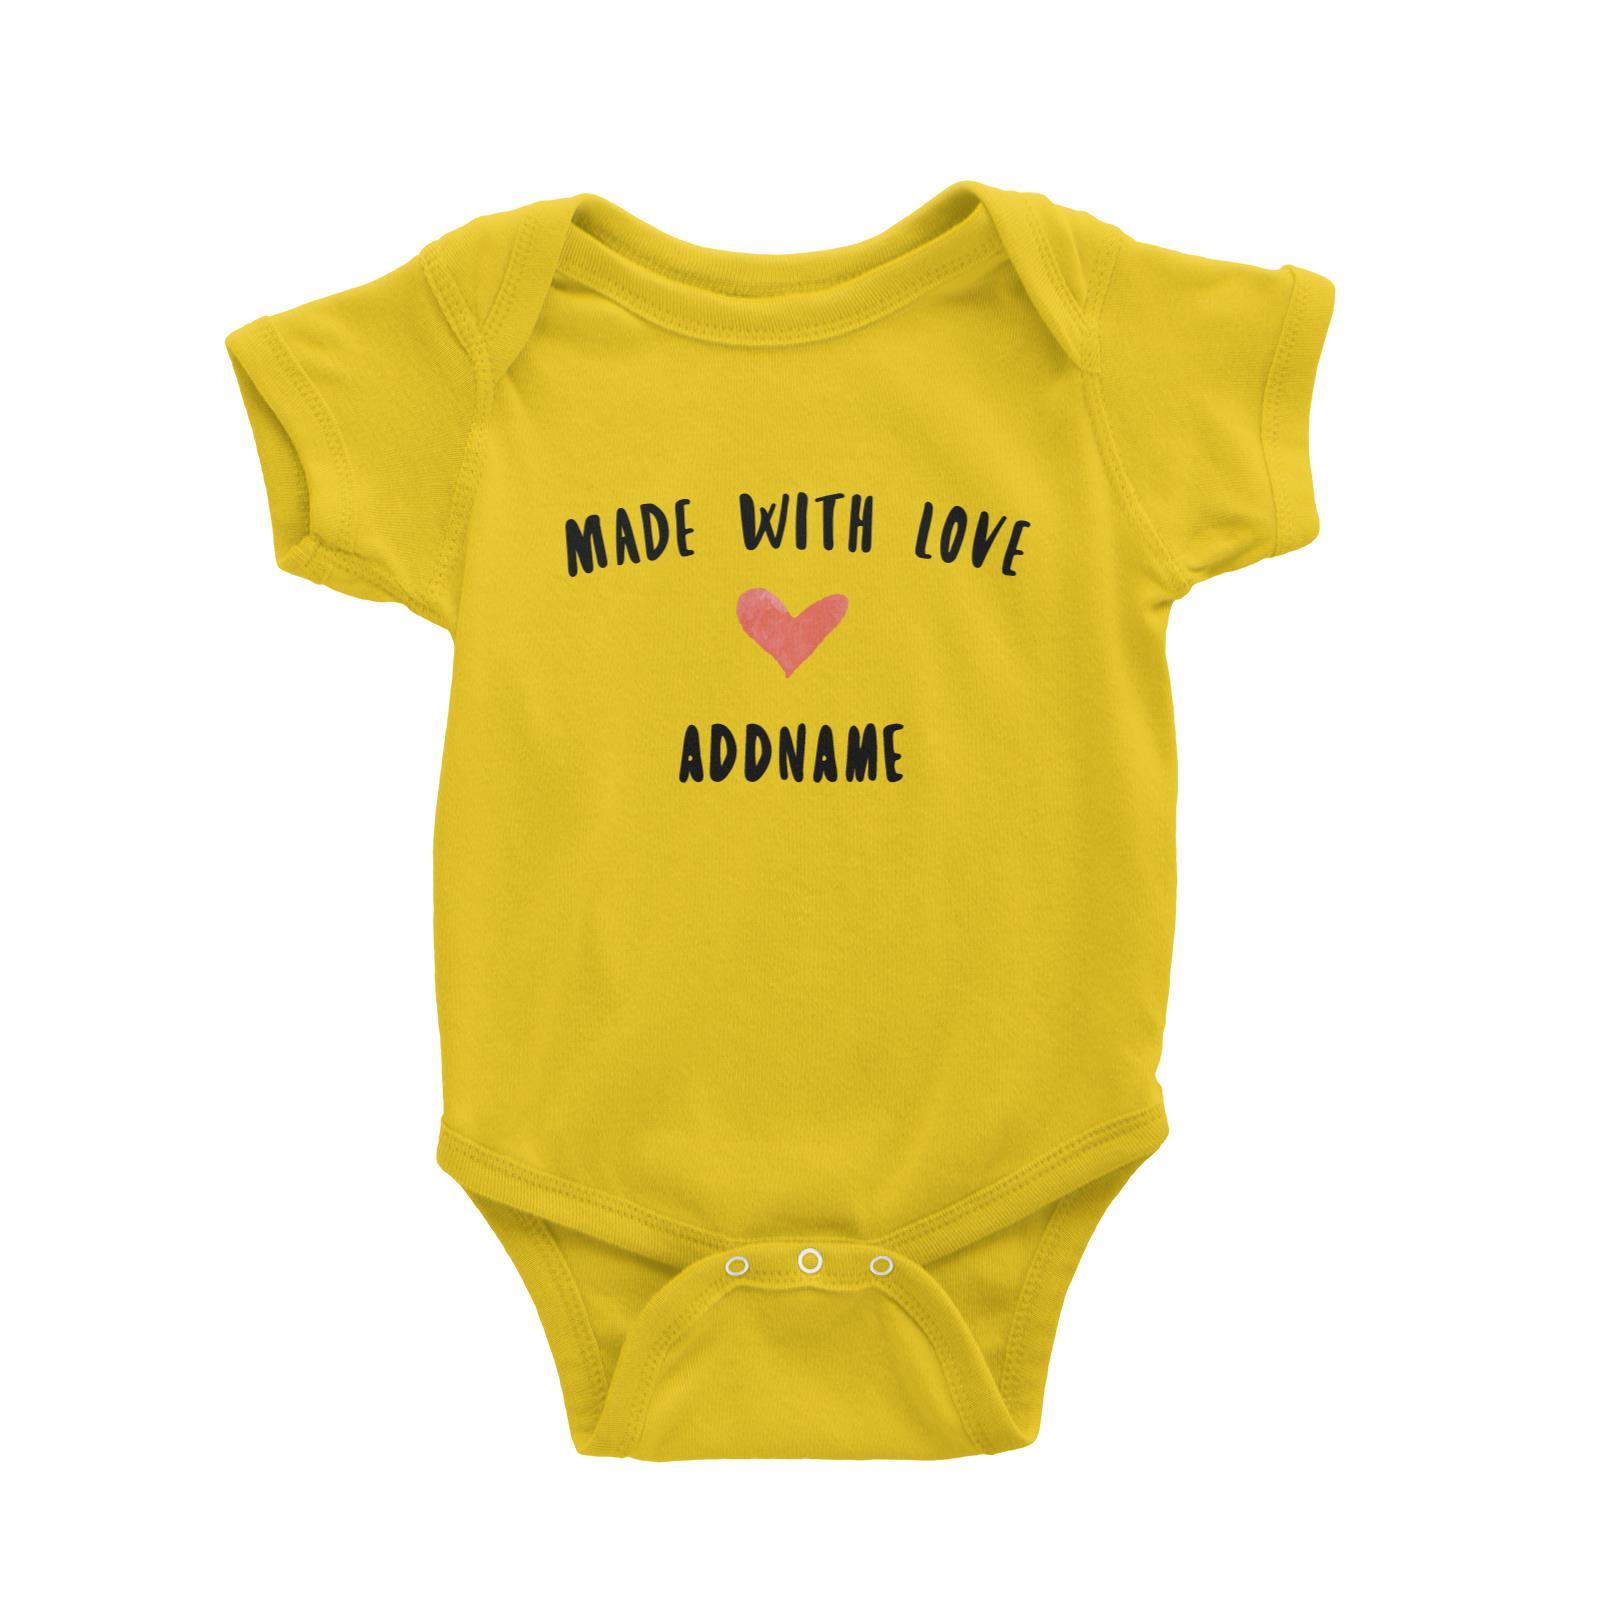 Made With Love Addname Baby Romper Personalizable Designs Basic Newborn